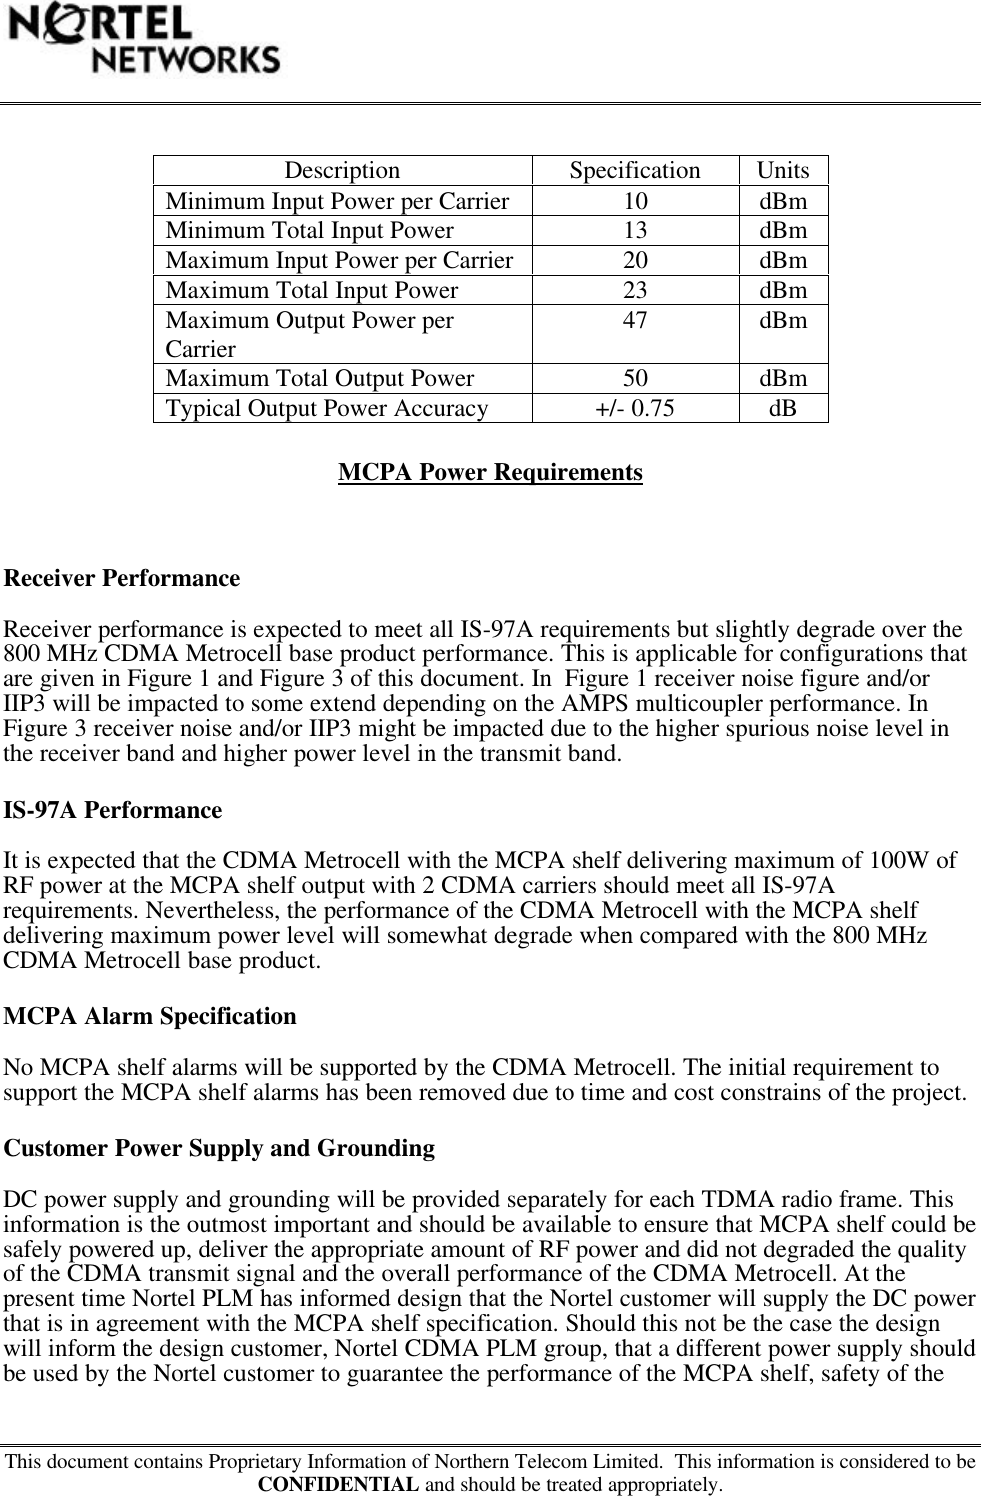 This document contains Proprietary Information of Northern Telecom Limited.  This information is considered to beCONFIDENTIAL and should be treated appropriately.Description Specification UnitsMinimum Input Power per Carrier 10 dBmMinimum Total Input Power 13 dBmMaximum Input Power per Carrier 20 dBmMaximum Total Input Power 23 dBmMaximum Output Power perCarrier 47 dBmMaximum Total Output Power 50 dBmTypical Output Power Accuracy +/- 0.75 dBMCPA Power RequirementsReceiver PerformanceReceiver performance is expected to meet all IS-97A requirements but slightly degrade over the800 MHz CDMA Metrocell base product performance. This is applicable for configurations thatare given in Figure 1 and Figure 3 of this document. In  Figure 1 receiver noise figure and/orIIP3 will be impacted to some extend depending on the AMPS multicoupler performance. InFigure 3 receiver noise and/or IIP3 might be impacted due to the higher spurious noise level inthe receiver band and higher power level in the transmit band.IS-97A PerformanceIt is expected that the CDMA Metrocell with the MCPA shelf delivering maximum of 100W ofRF power at the MCPA shelf output with 2 CDMA carriers should meet all IS-97Arequirements. Nevertheless, the performance of the CDMA Metrocell with the MCPA shelfdelivering maximum power level will somewhat degrade when compared with the 800 MHzCDMA Metrocell base product.MCPA Alarm SpecificationNo MCPA shelf alarms will be supported by the CDMA Metrocell. The initial requirement tosupport the MCPA shelf alarms has been removed due to time and cost constrains of the project.Customer Power Supply and GroundingDC power supply and grounding will be provided separately for each TDMA radio frame. Thisinformation is the outmost important and should be available to ensure that MCPA shelf could besafely powered up, deliver the appropriate amount of RF power and did not degraded the qualityof the CDMA transmit signal and the overall performance of the CDMA Metrocell. At thepresent time Nortel PLM has informed design that the Nortel customer will supply the DC powerthat is in agreement with the MCPA shelf specification. Should this not be the case the designwill inform the design customer, Nortel CDMA PLM group, that a different power supply shouldbe used by the Nortel customer to guarantee the performance of the MCPA shelf, safety of the